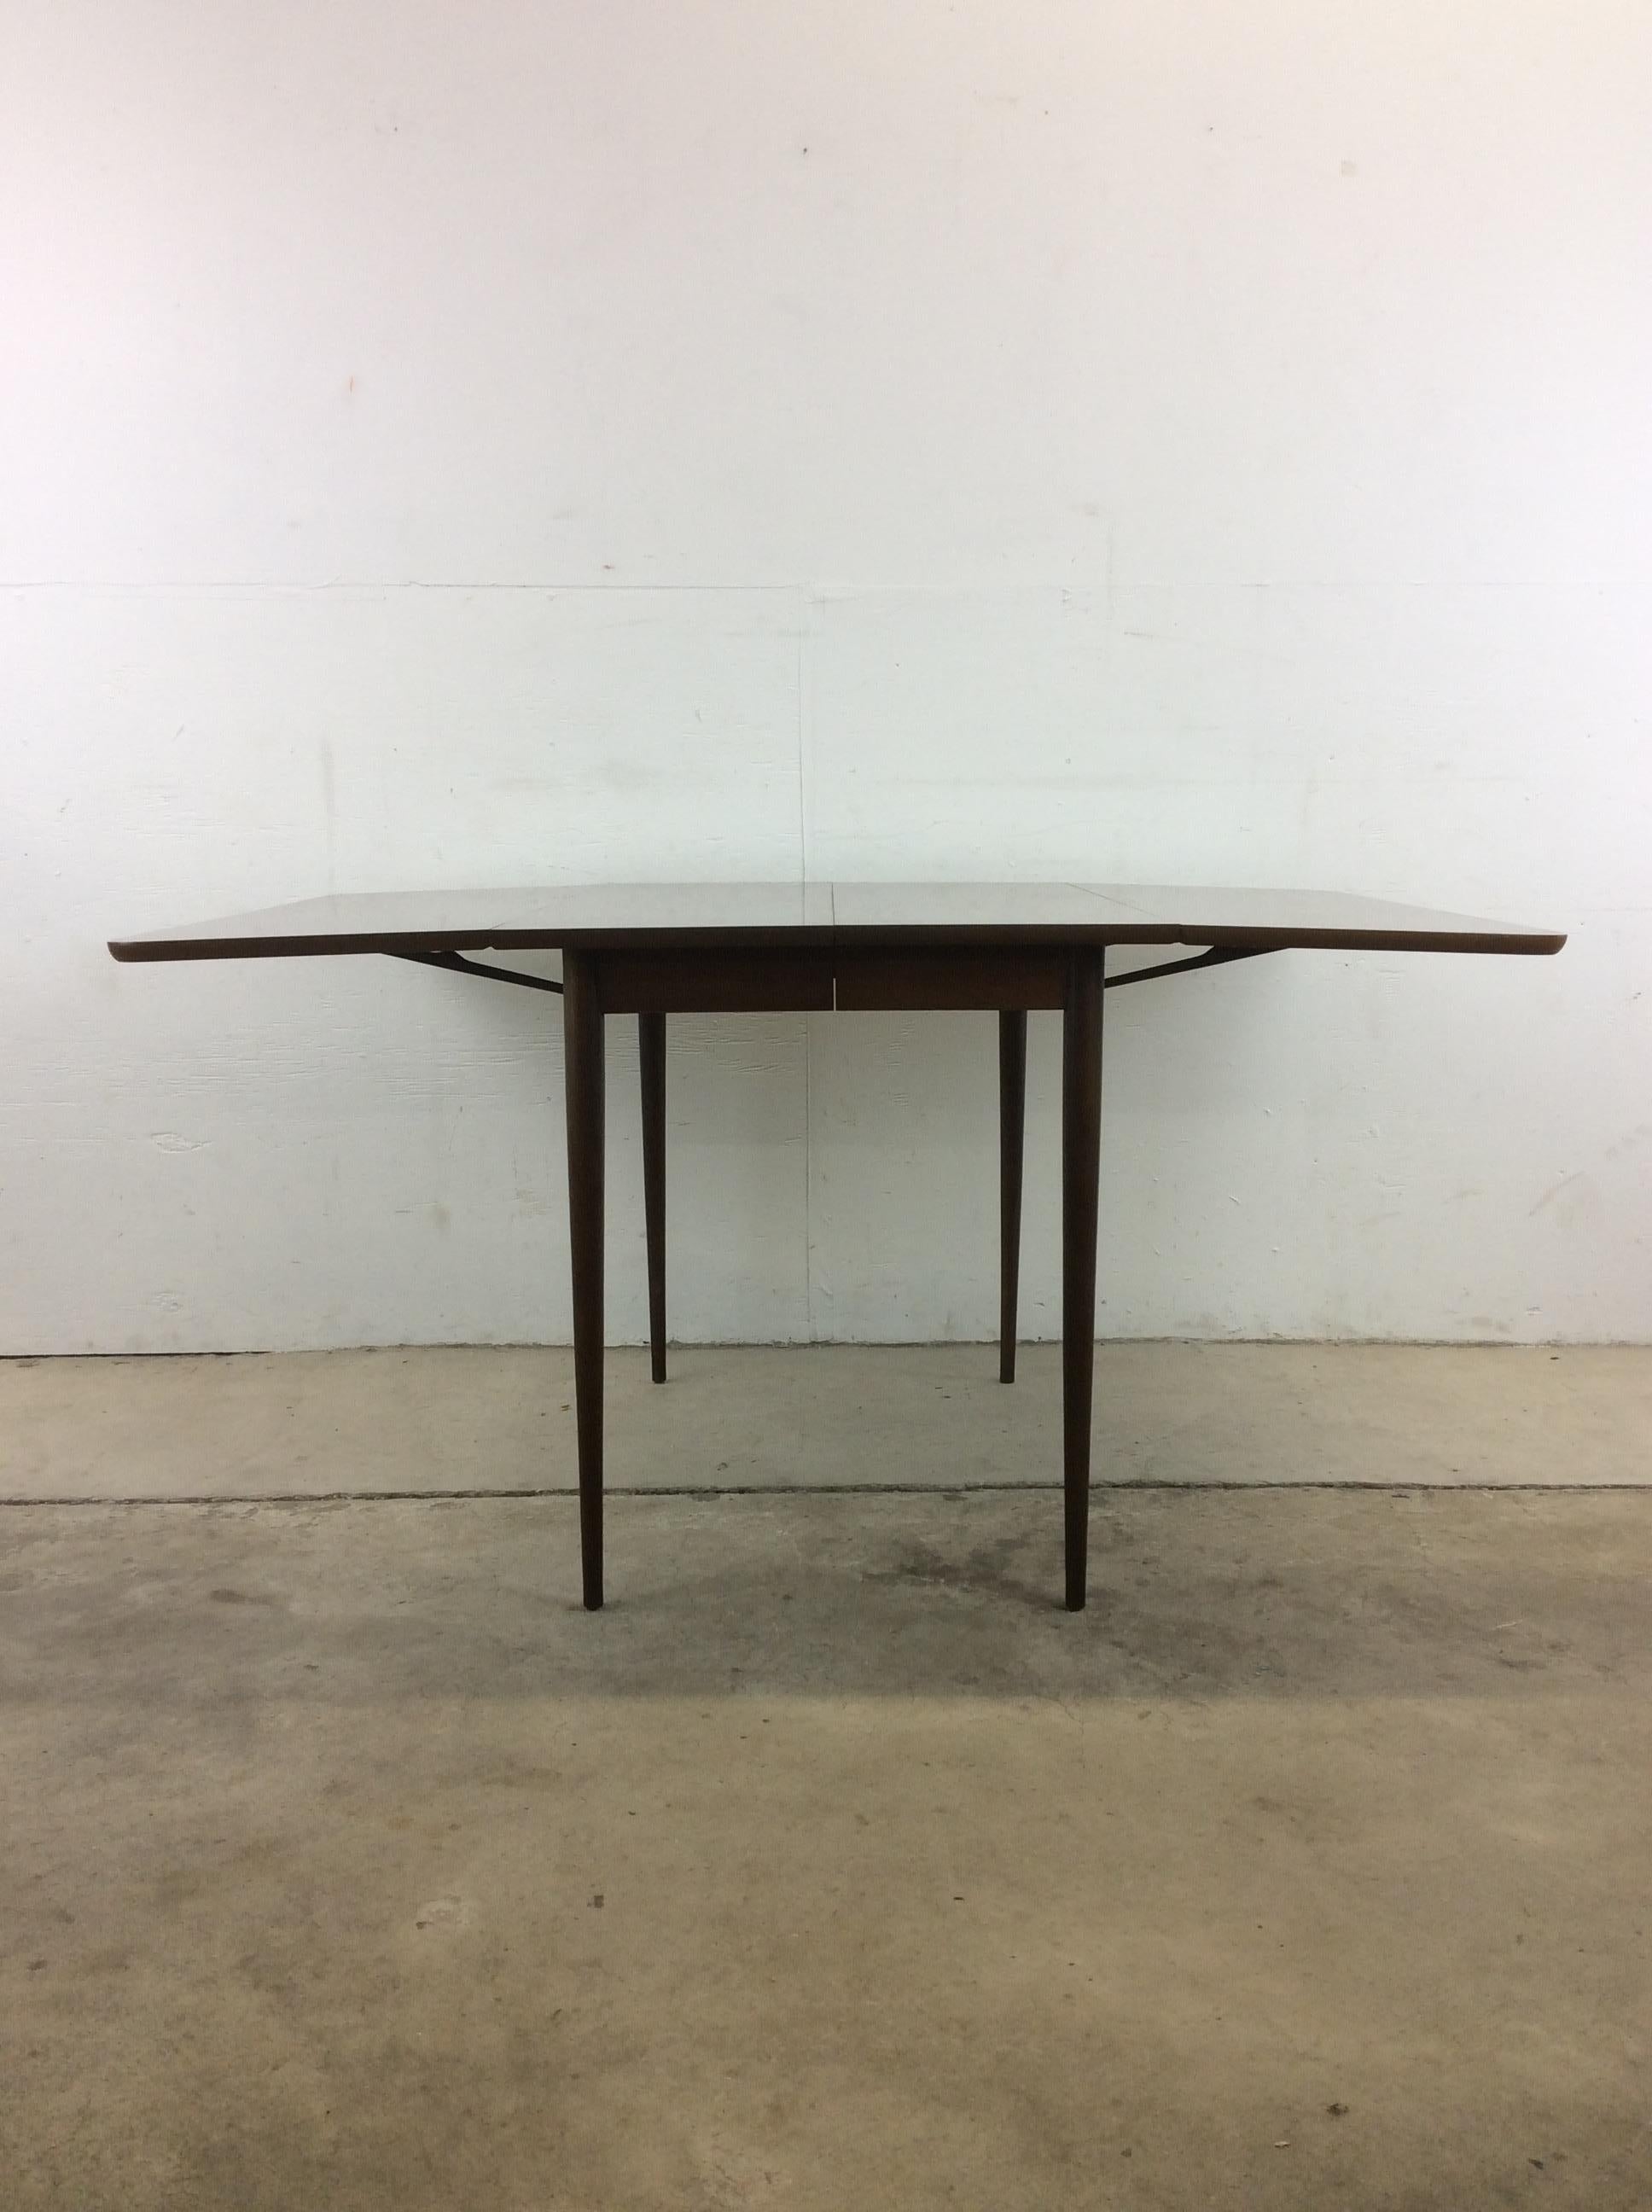 This Mid-Century Modern dining table features drop leaf design, durable formica top with faux woodgrain, two additional leafs, and tall tapered legs.??Complimentary dining chairs available separately. 

Dimensions: 59.5w 40d 30.25h + 3 12w leafs